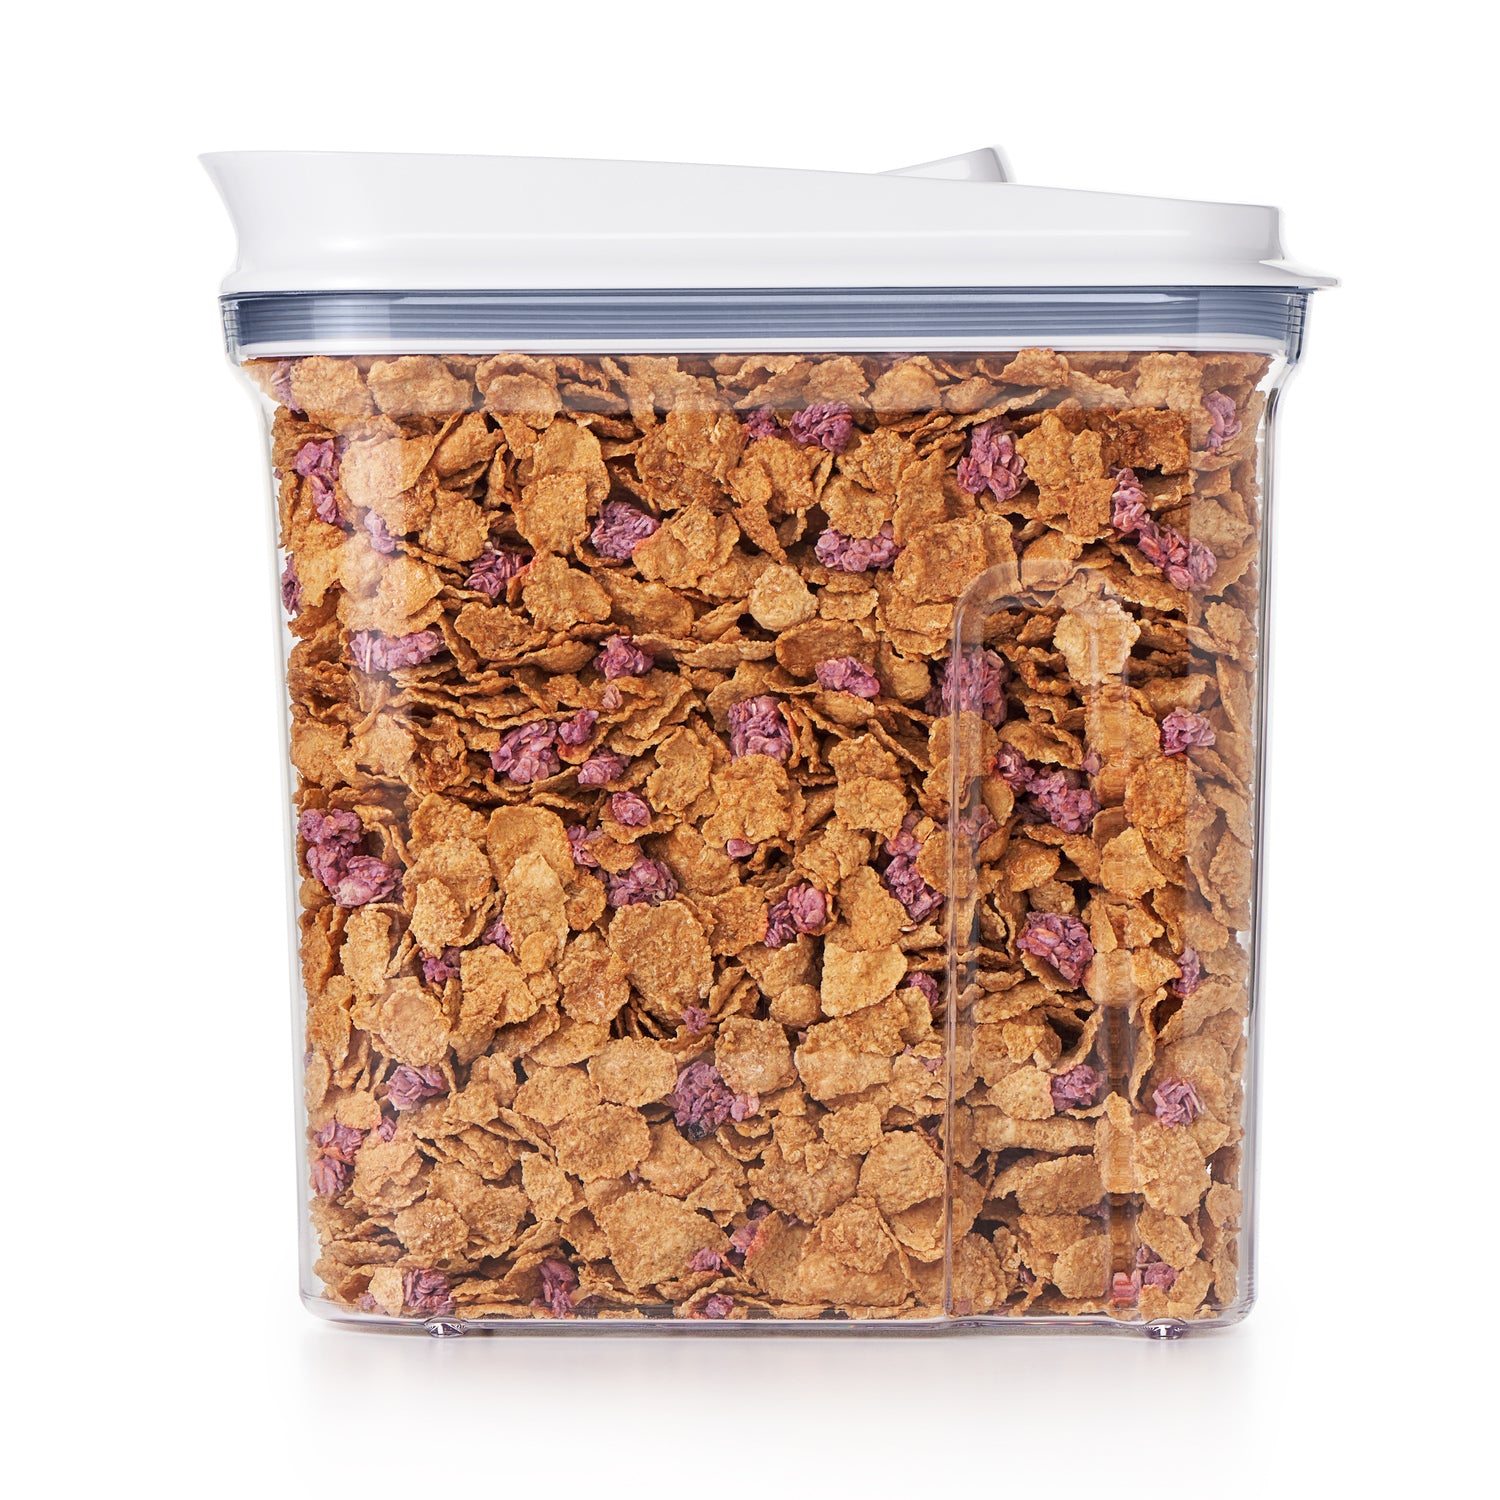 NEW OXO Good Grips Cereal Container 3.2L